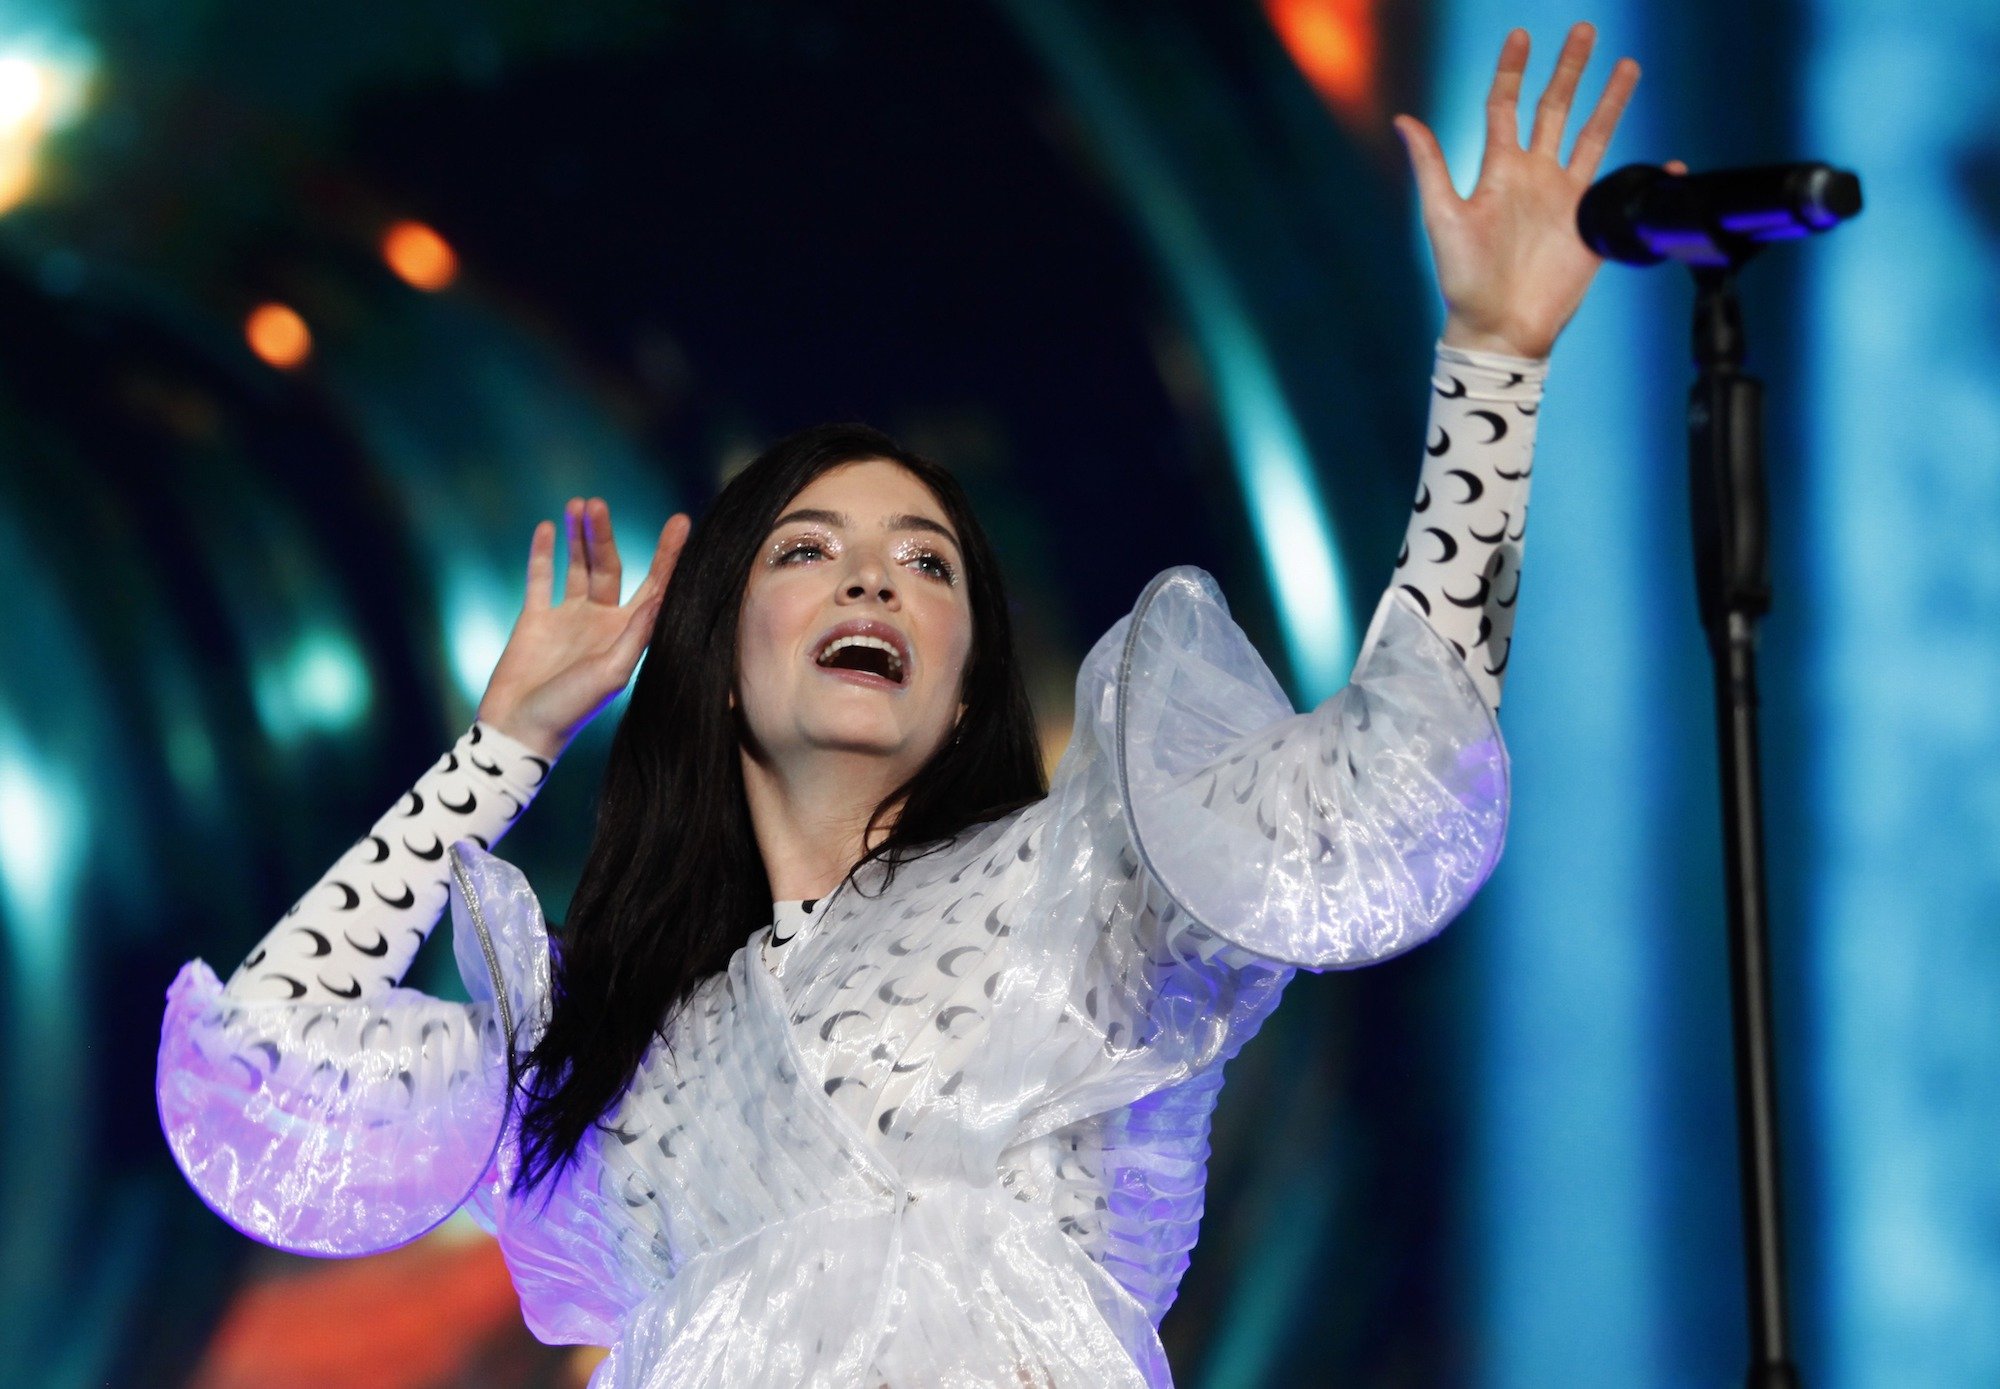 New Zealand singer, Lorde performs during her concert at the Corona Capital Music Festival on November 17, 2018